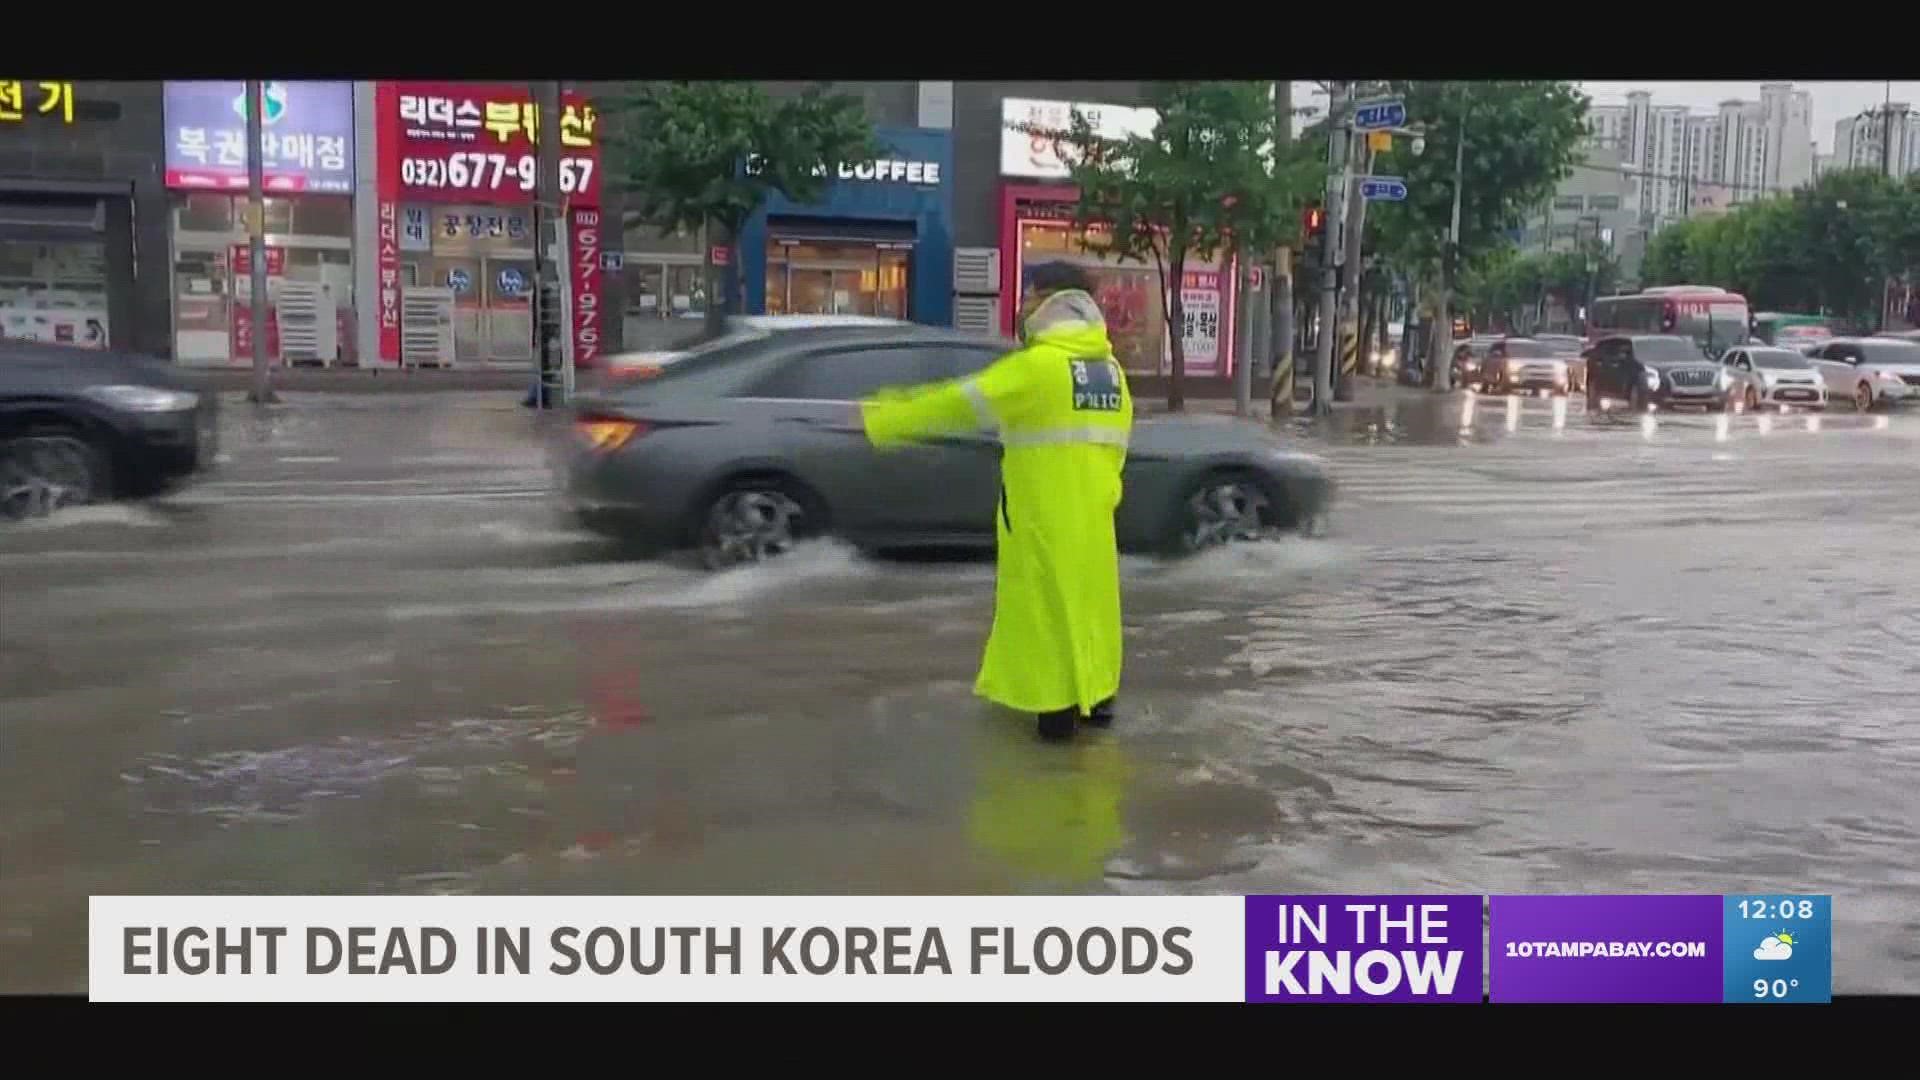 Heavy rains flooded the streets of Seoul's affluent Gangnam district, submerging vehicles and overwhelming public transport.